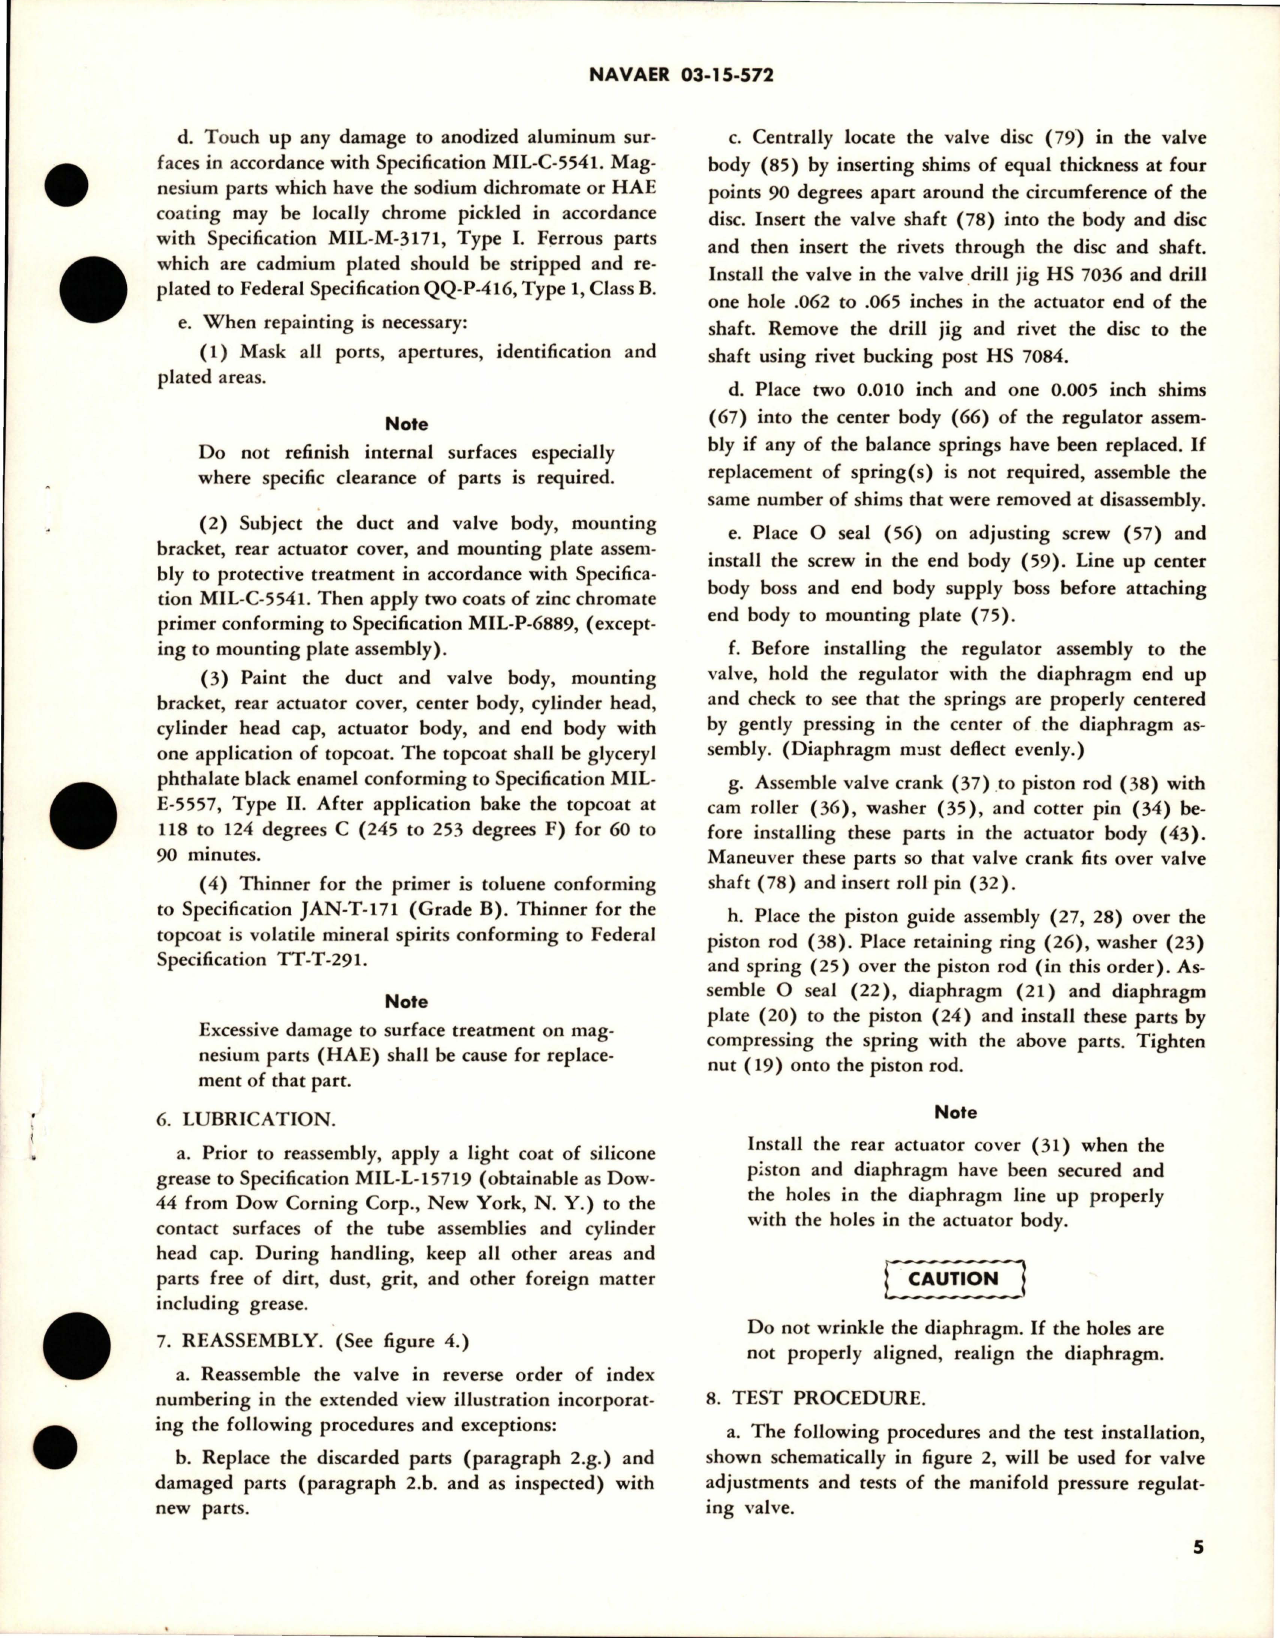 Sample page 5 from AirCorps Library document: Overhaul Instructions with Parts for Manifold Pressure Regulator Valve - Assembly No. 97000 